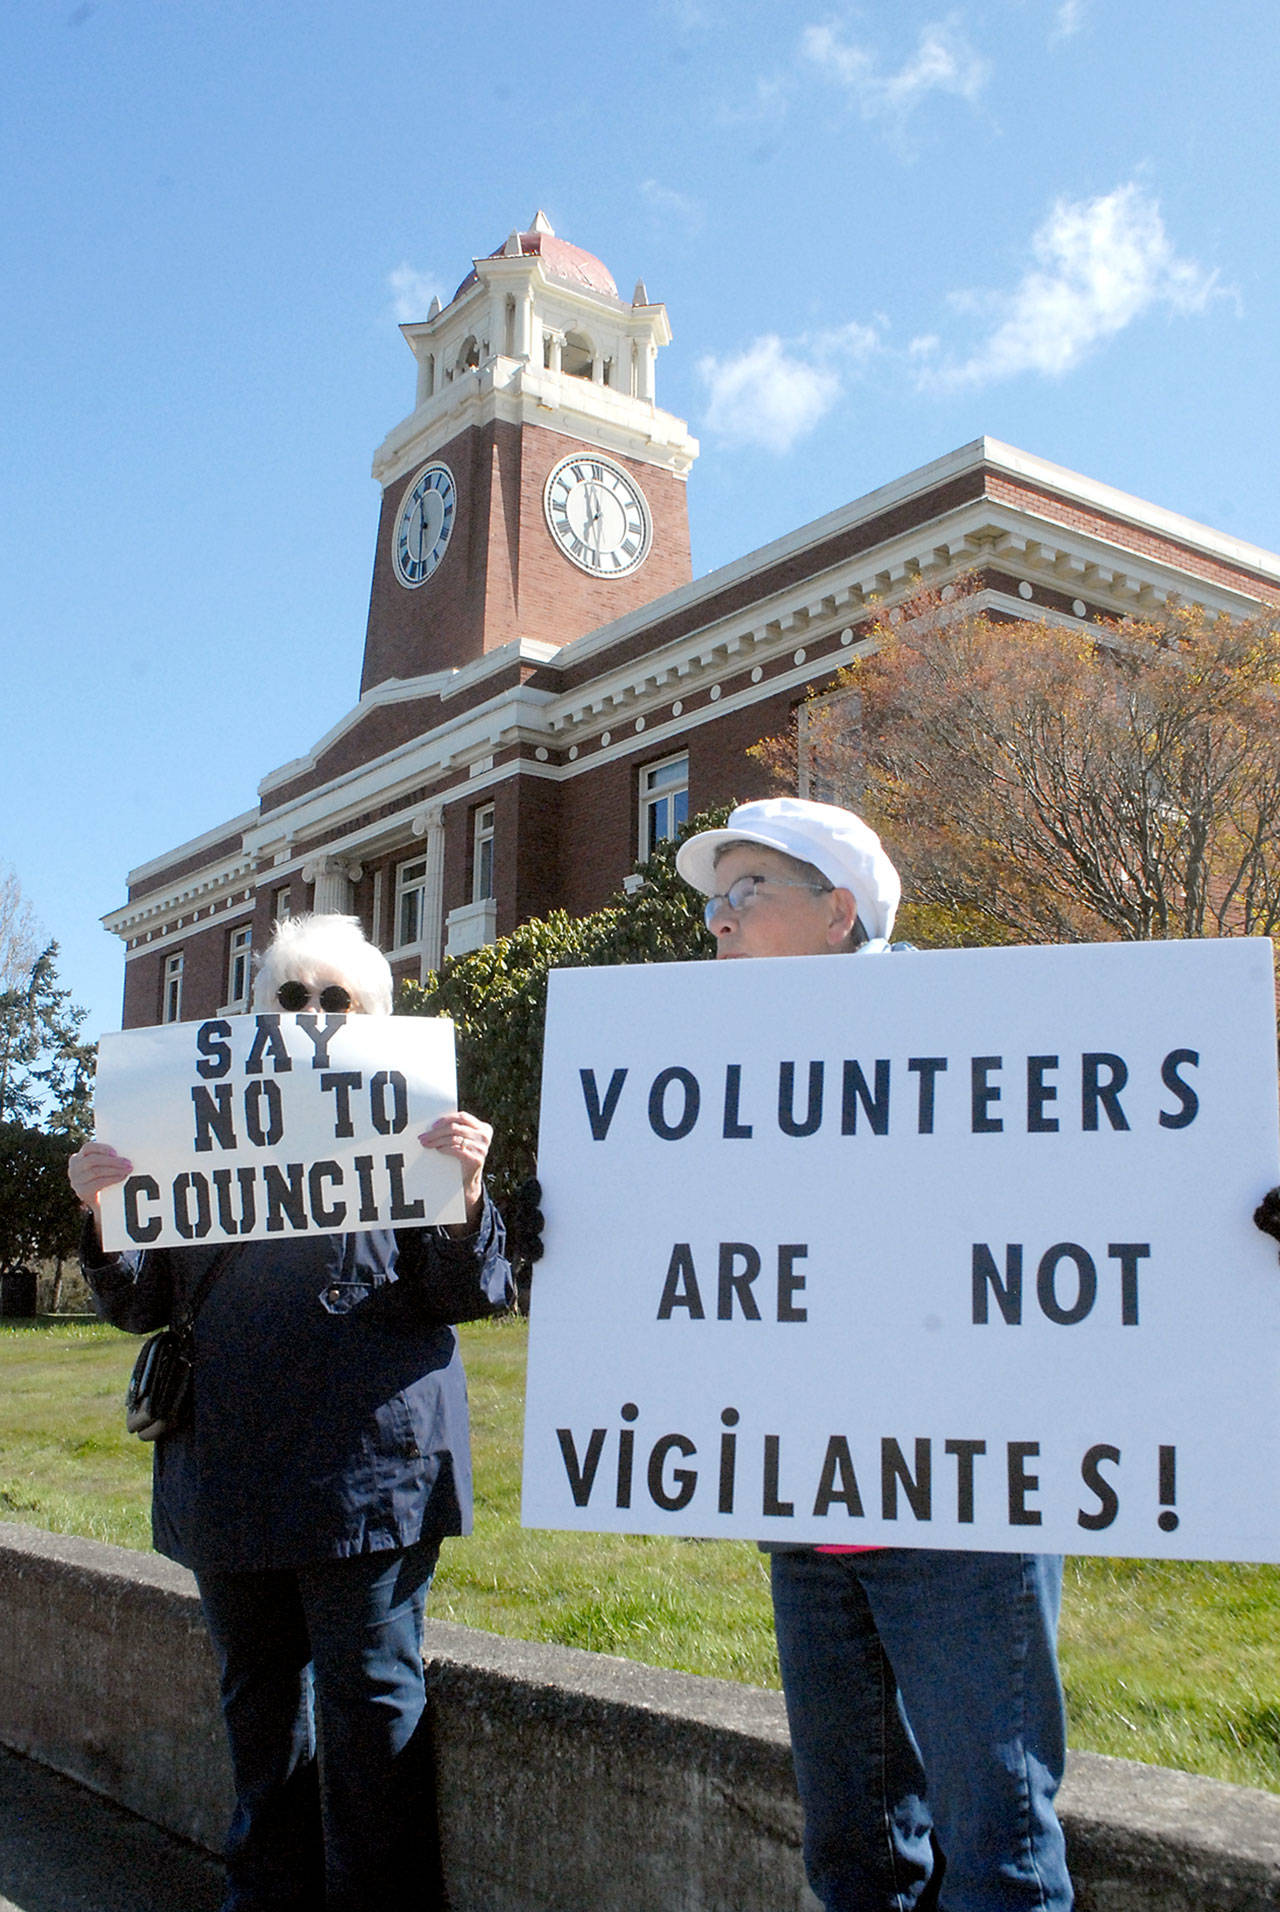 Darlene Heskett, left, and Patty Pastore hold signs on Saturday in front of the Clallam County Courthouse in Port Angeles protesting what they said is inaction by the Port Angeles City Council in handling homelessness and drug abuse in the city, as well as having been termed “vigilantes” for their cleanup efforts. The pair were part of a group of about 15 people taking part in the protest. (Keith Thorpe/Peninsula Daily News)